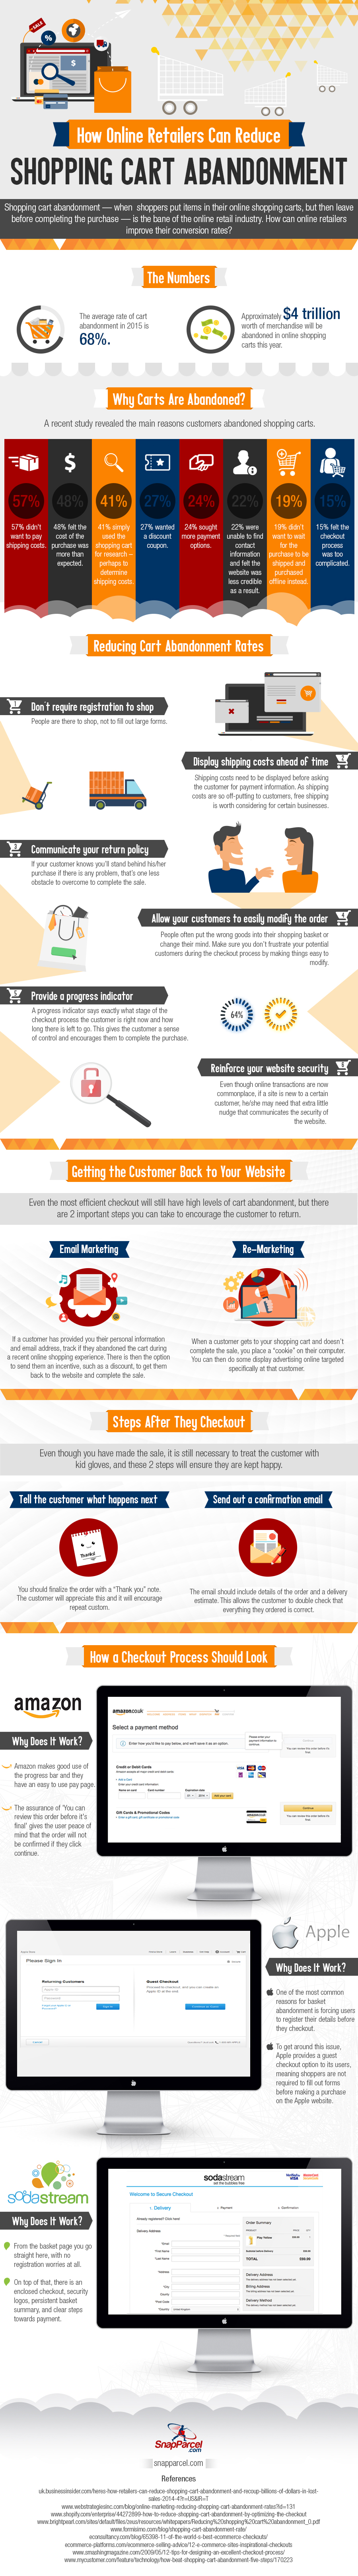 How Online Retailers Can Reduce Shopping Cart Abandonment Infographic